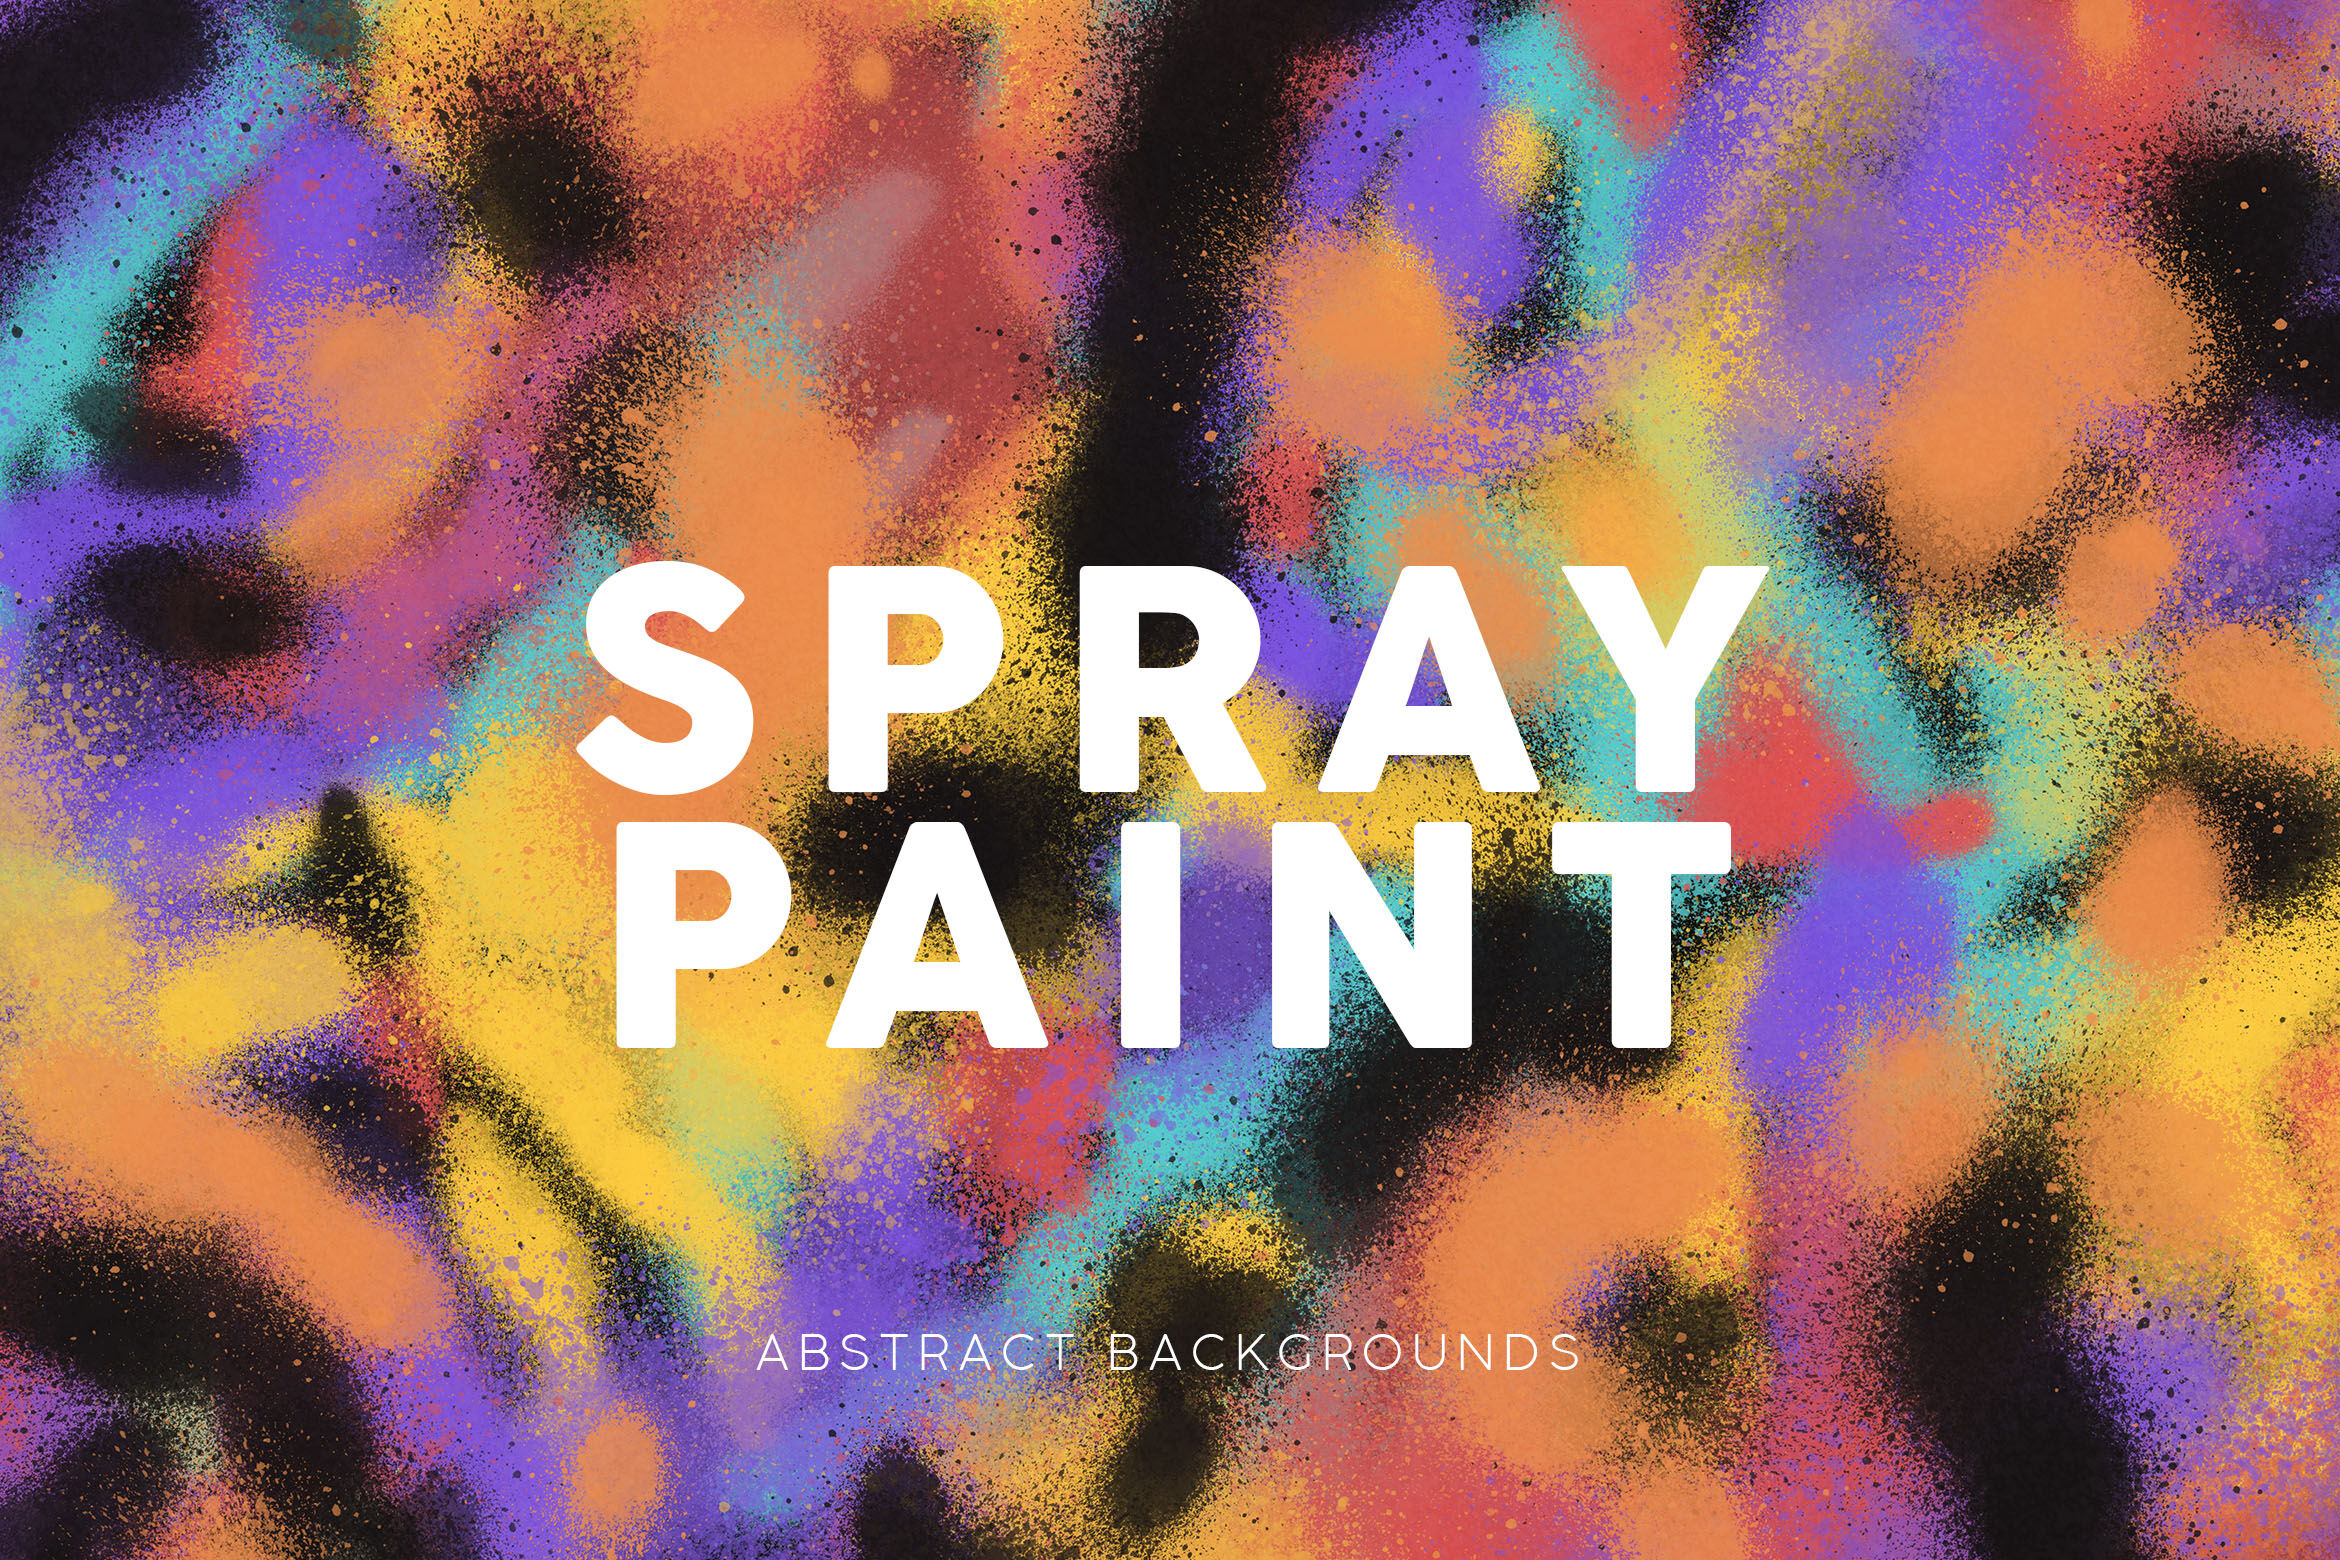 Spray Paint Abstract Backgrounds 2 By ArtistMef | TheHungryJPEG.com